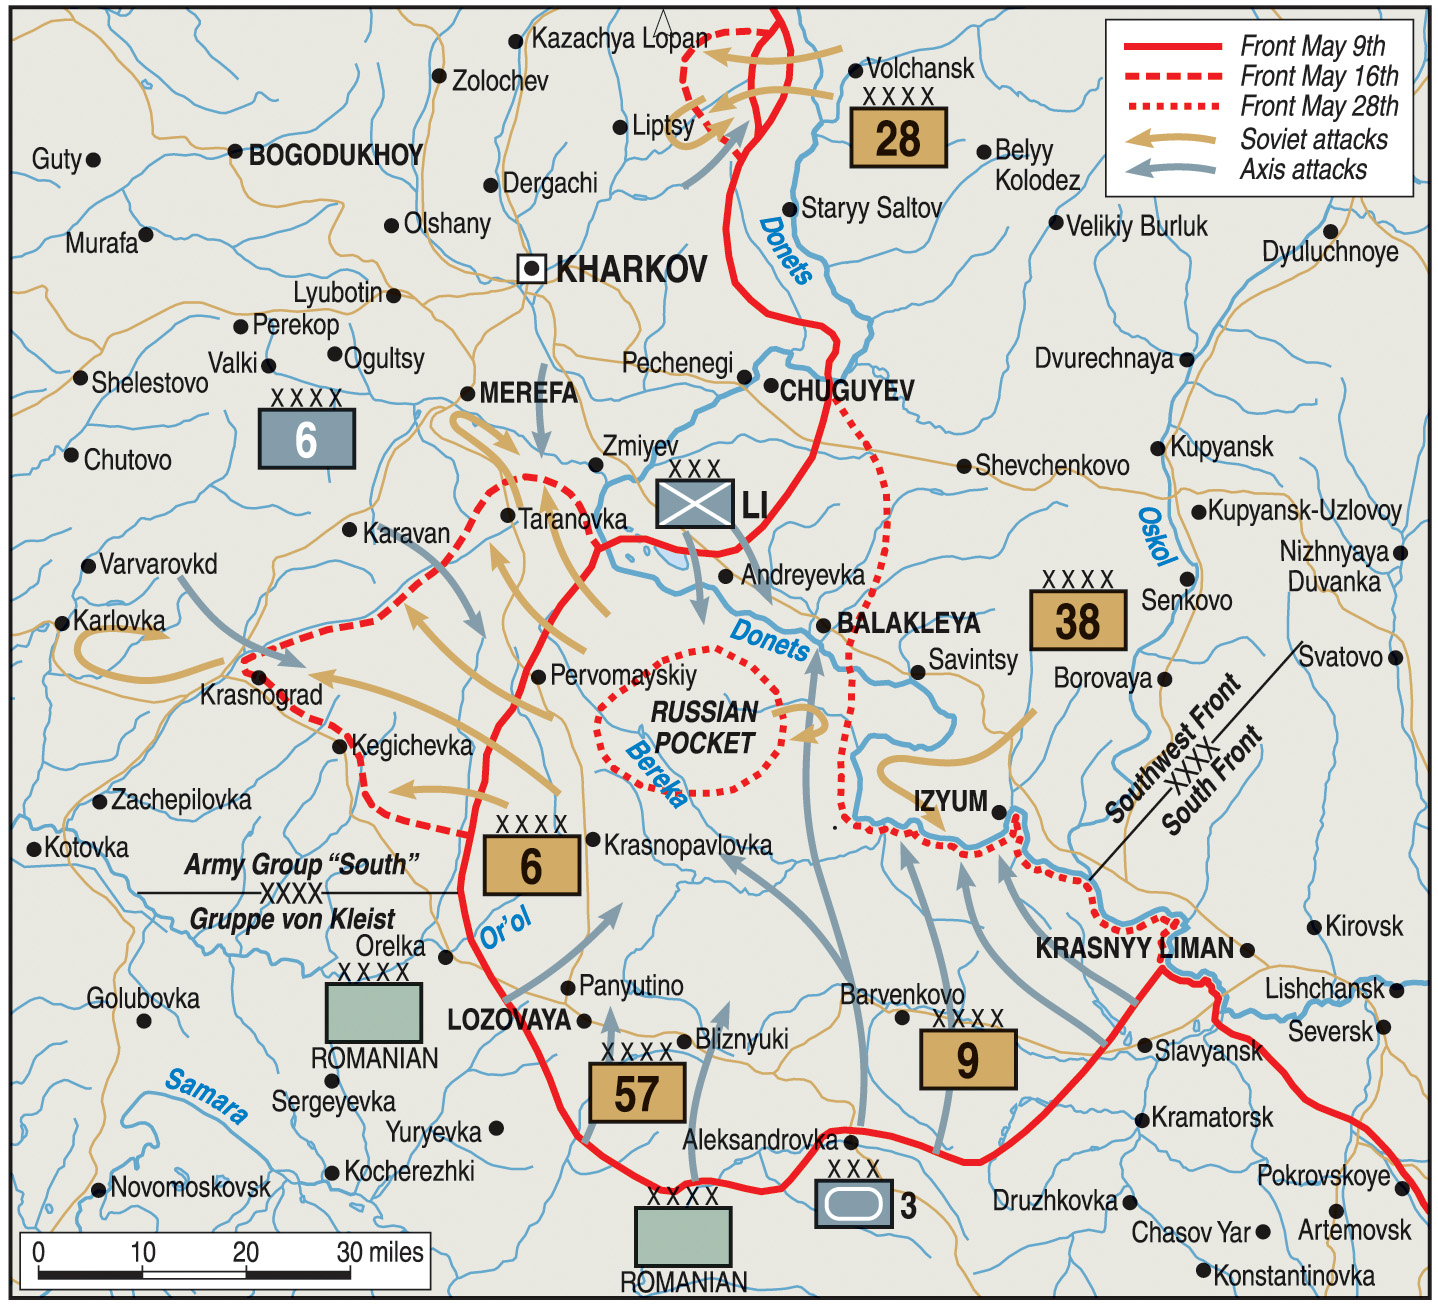 Both Soviet and German commanders formulated summer offensive plans to take advantage of the large salient in the front line around Izyum, a short distance from the key city of Kharkov.